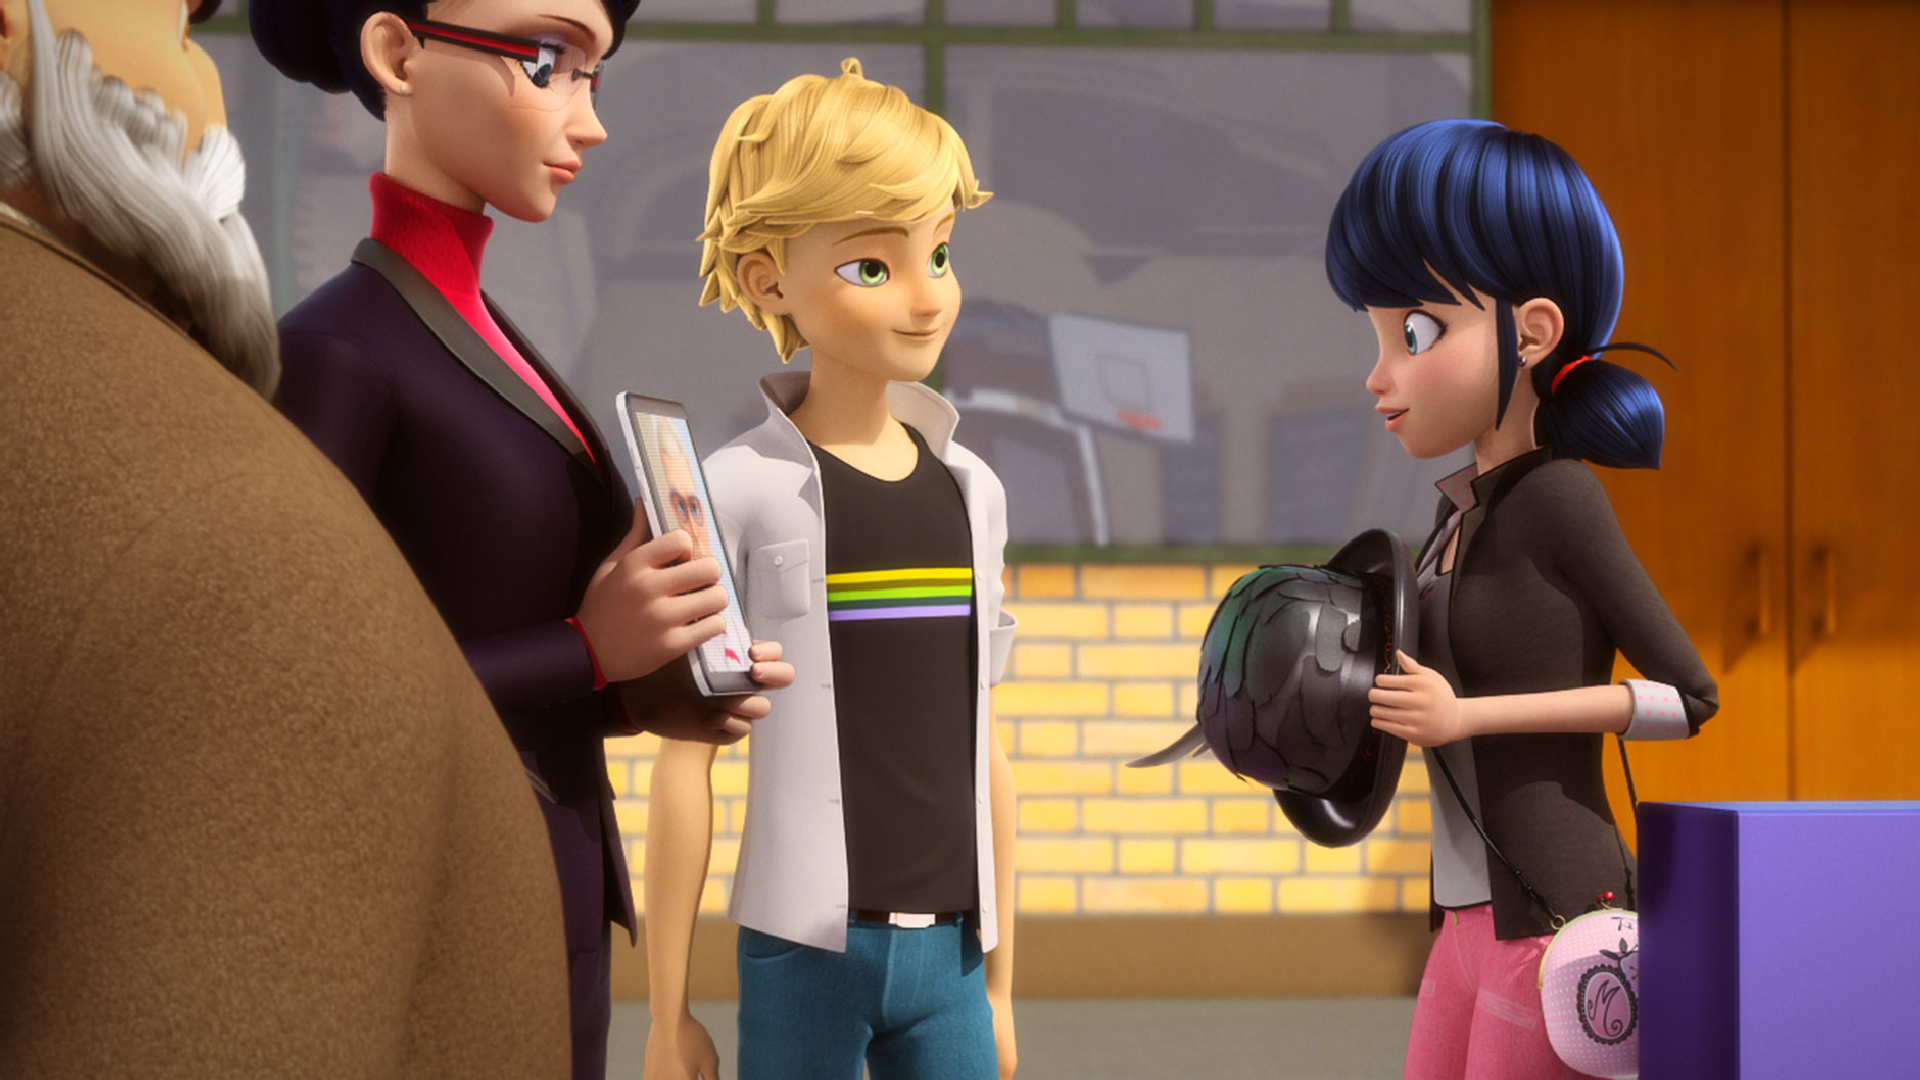 Adrien And Marinette Wallpapers